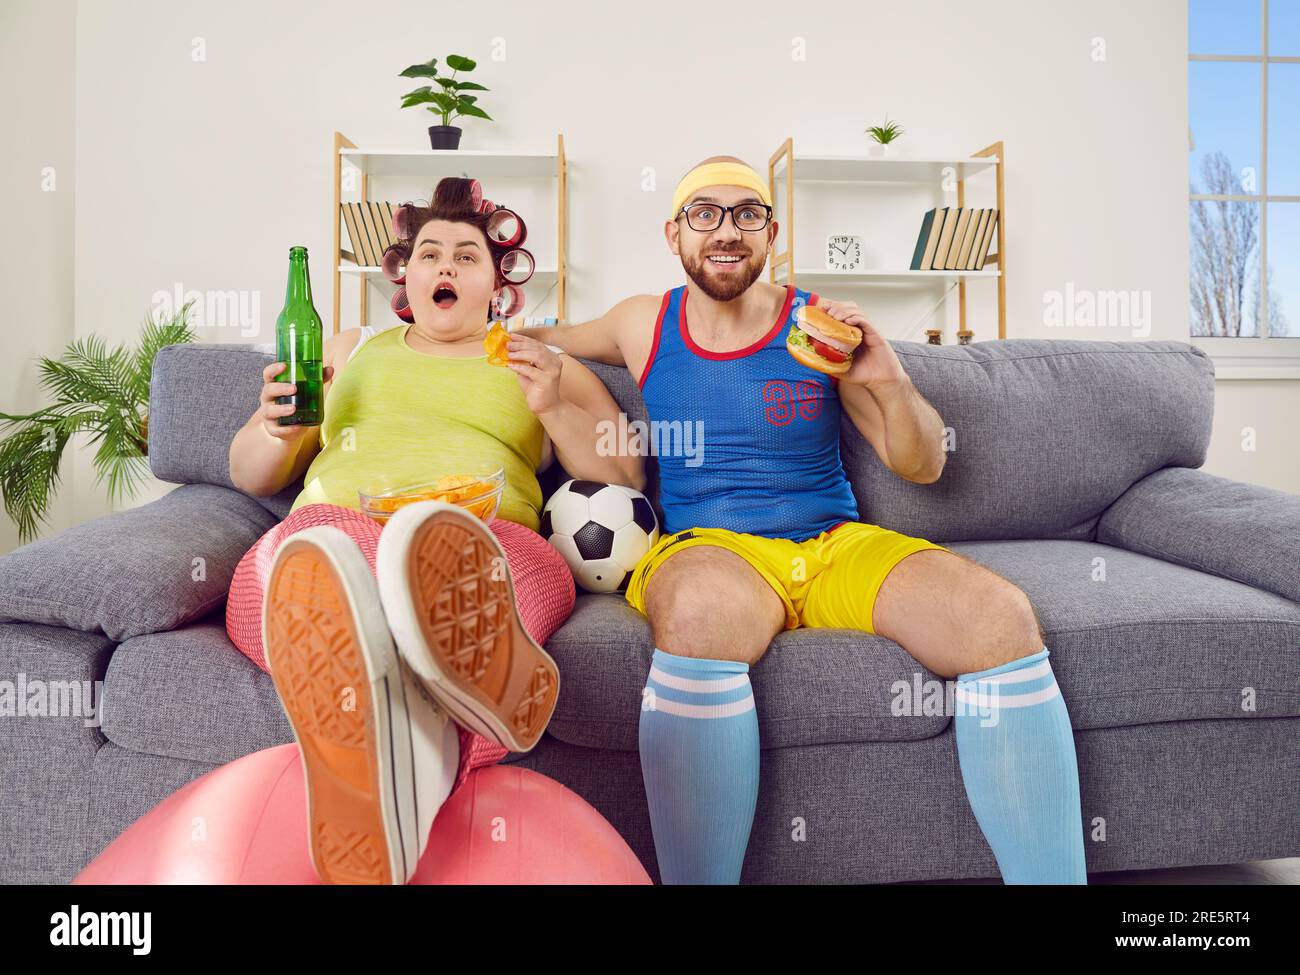 Funny family couple having cheat day, eating junk food and watching football on TV Stock Photo